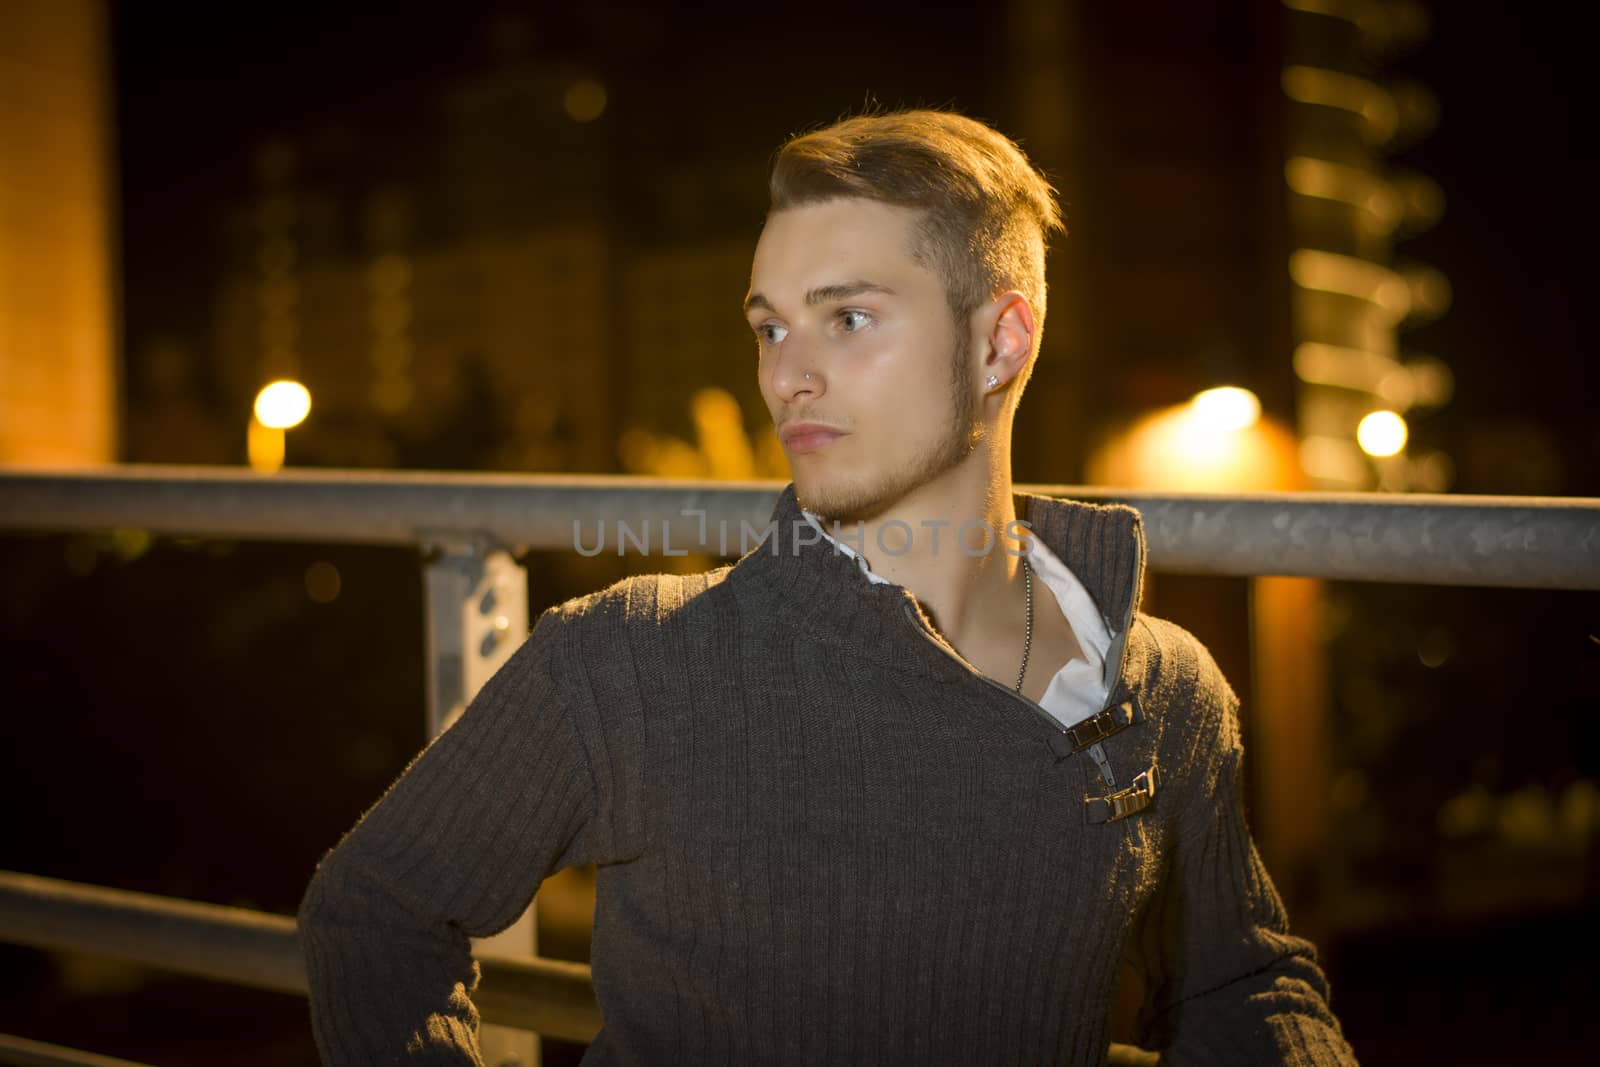 Handsome blond young man alone in urban setting by artofphoto